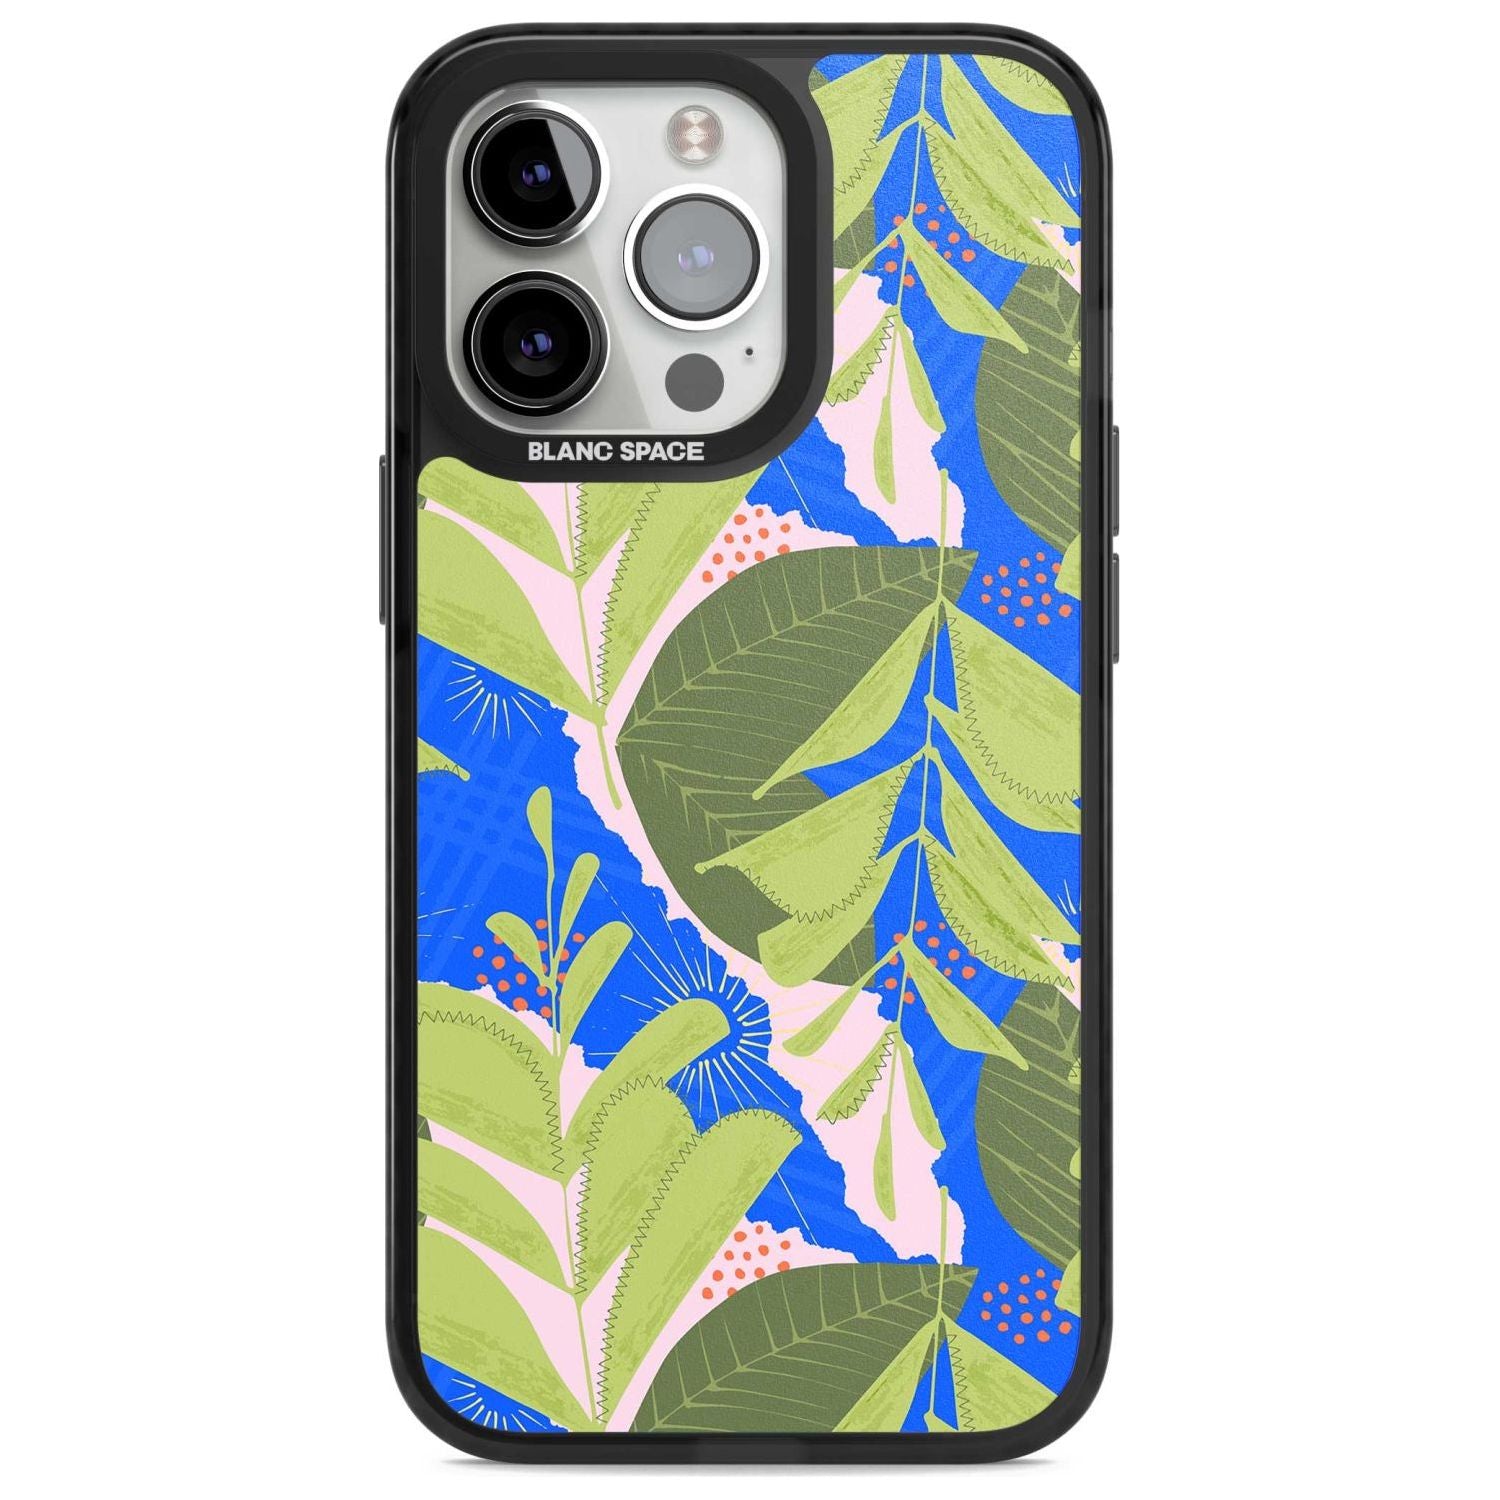 Fern Leaves Abstract Pattern Phone Case iPhone 15 Pro Max / Magsafe Black Impact Case,iPhone 15 Pro / Magsafe Black Impact Case,iPhone 14 Pro Max / Magsafe Black Impact Case,iPhone 14 Pro / Magsafe Black Impact Case,iPhone 13 Pro / Magsafe Black Impact Case Blanc Space